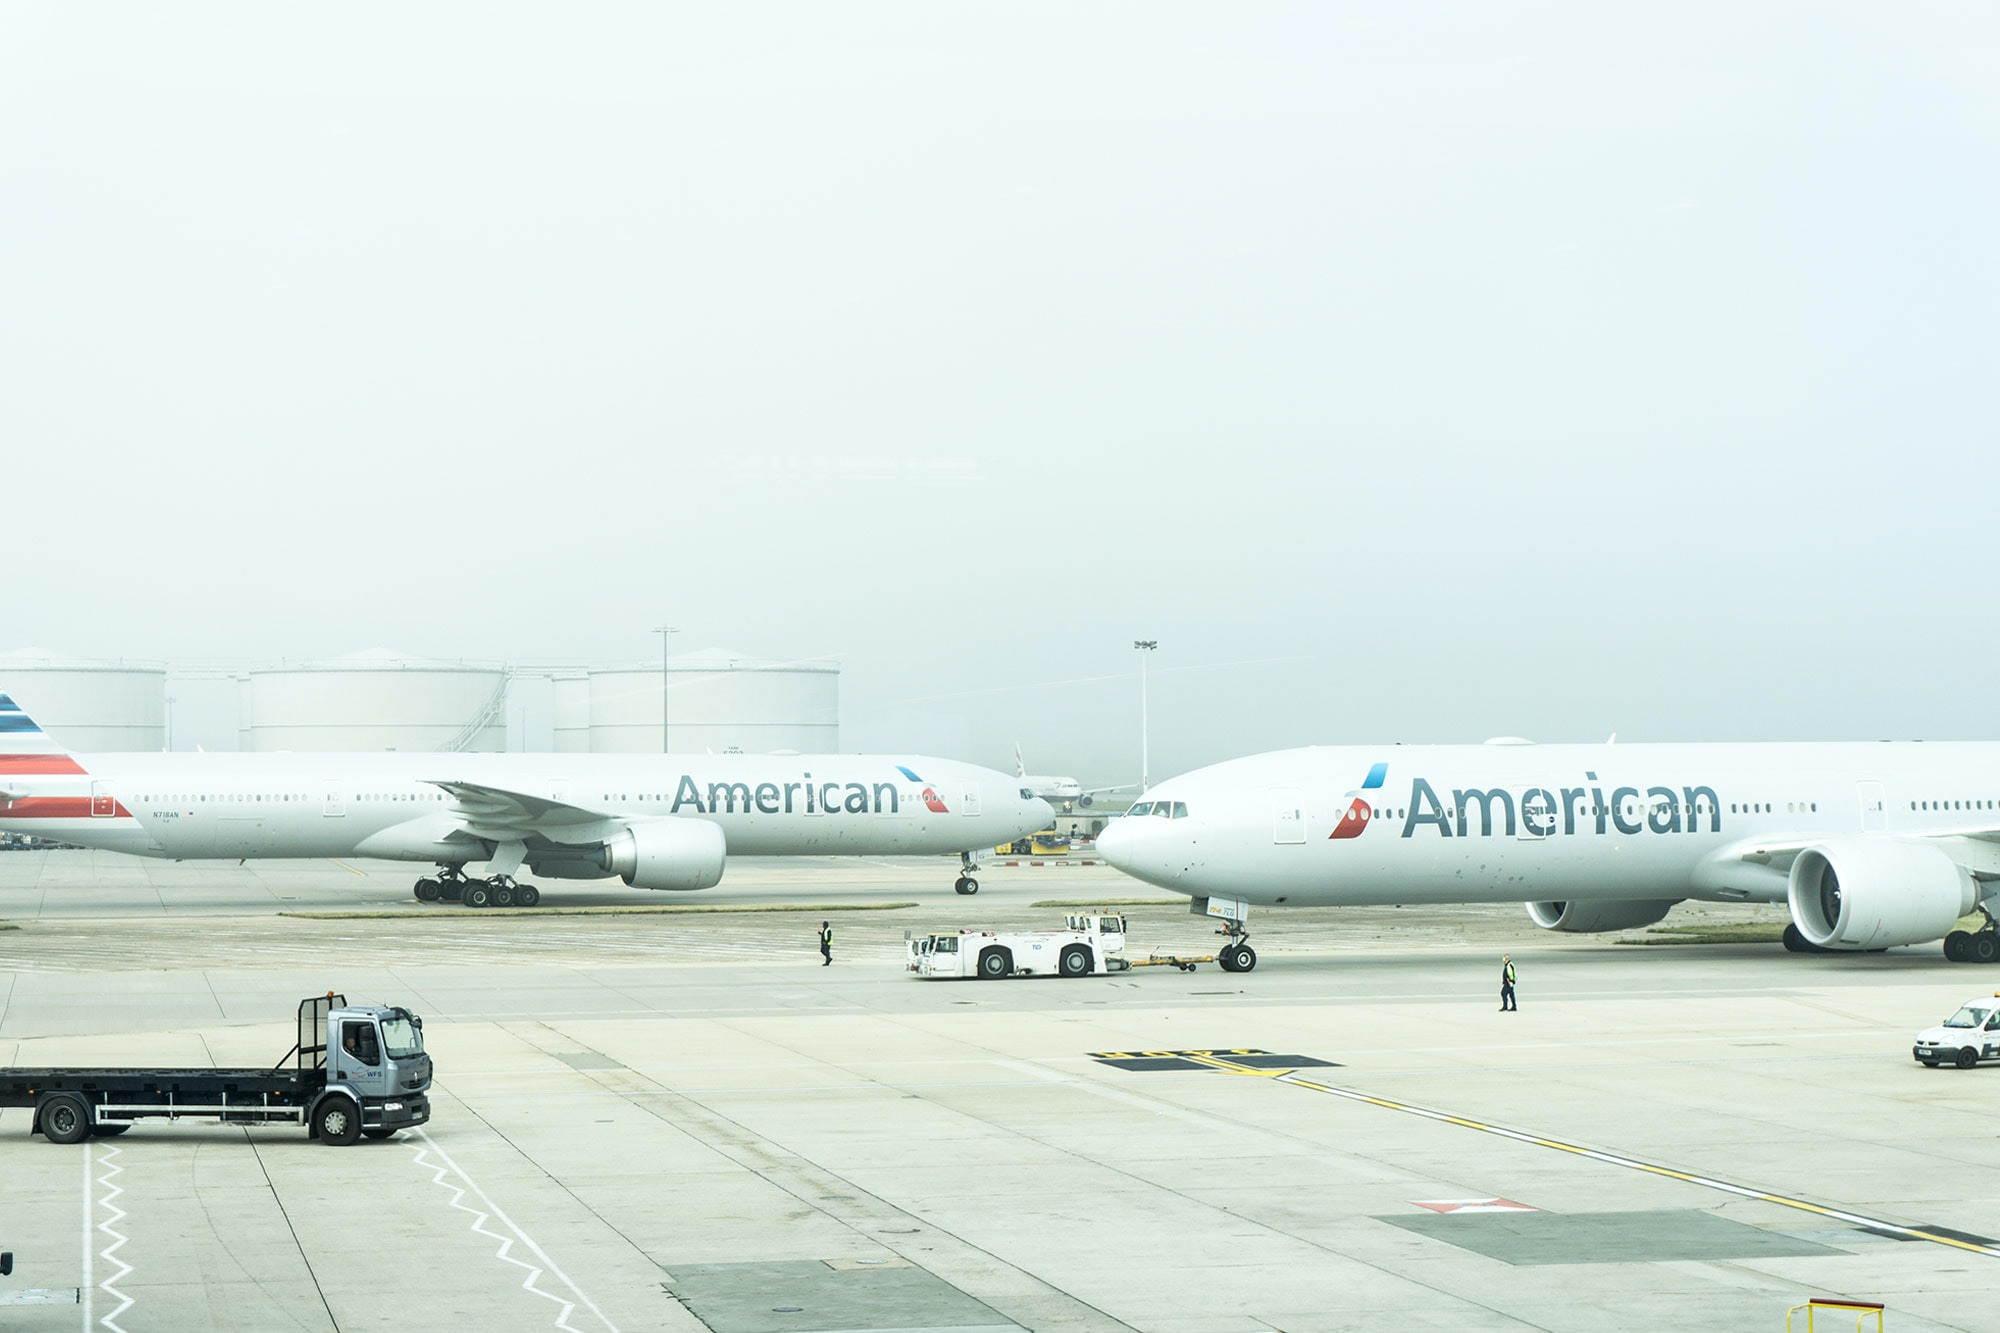 Two American Airlines aircraft taxiing around an airport tarmac.